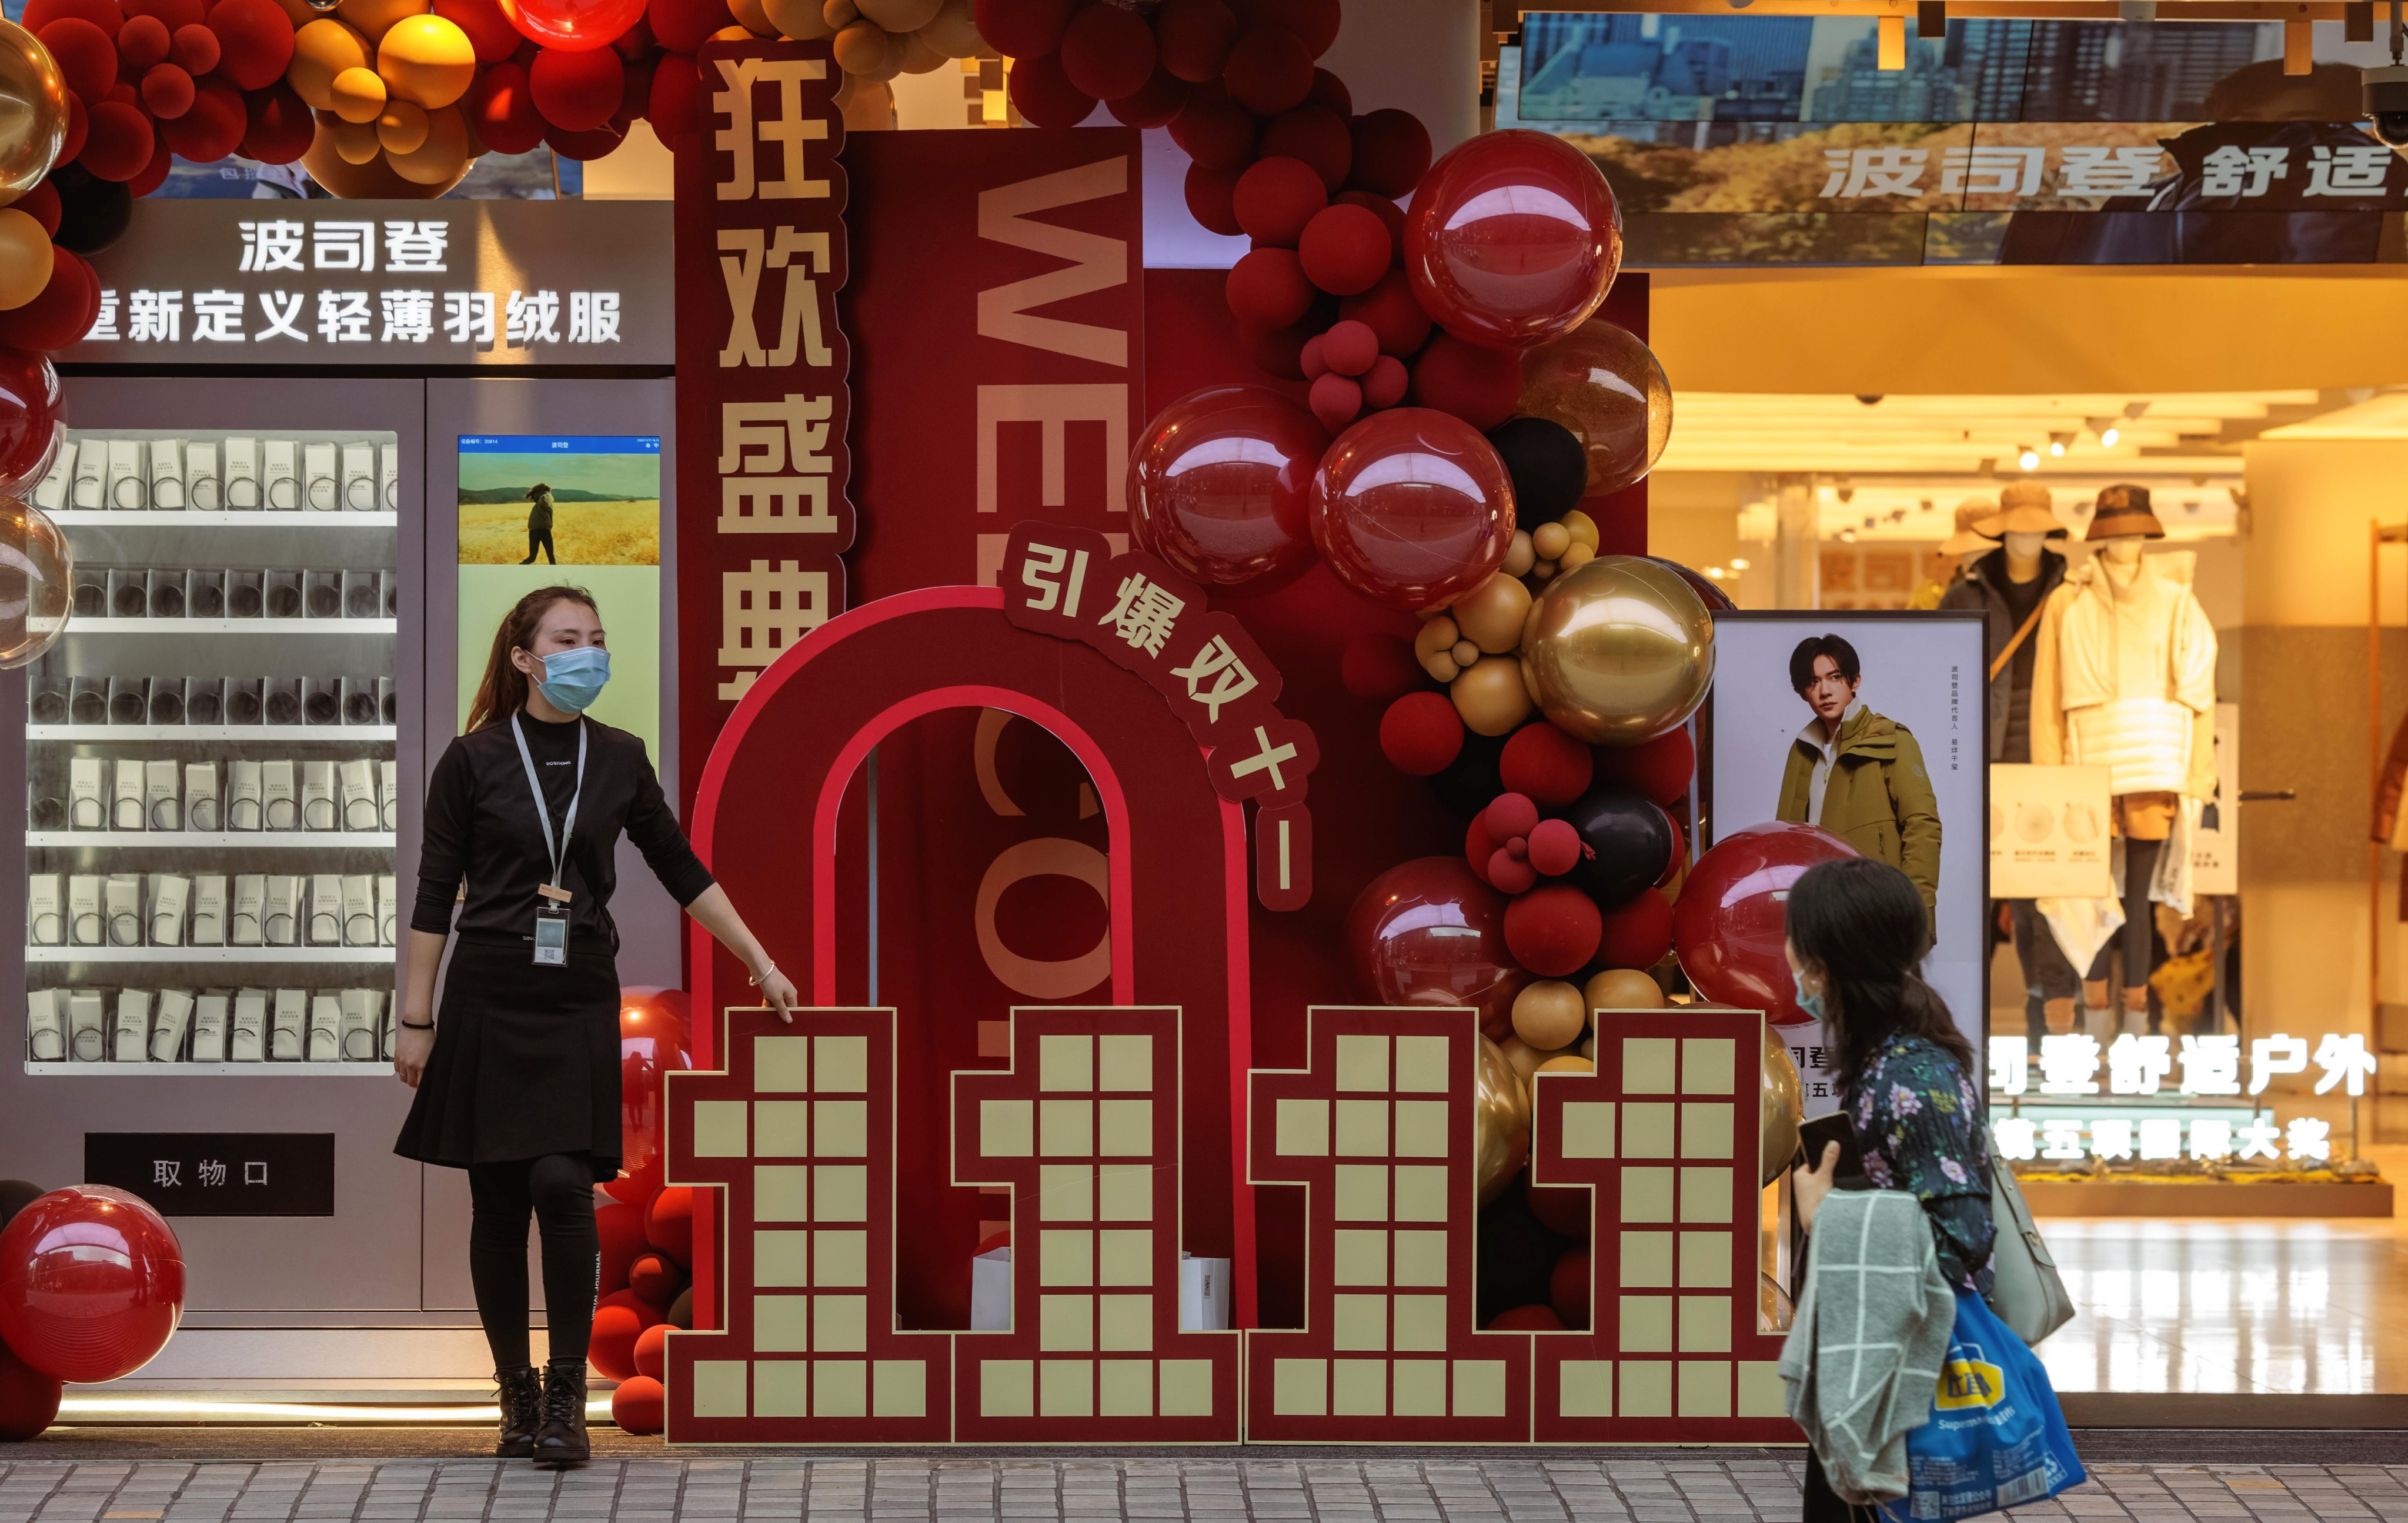 A shop employee promotes Singles’ Day discounts in Shanghai on November 11, 2022. Photo: EPA-EFE